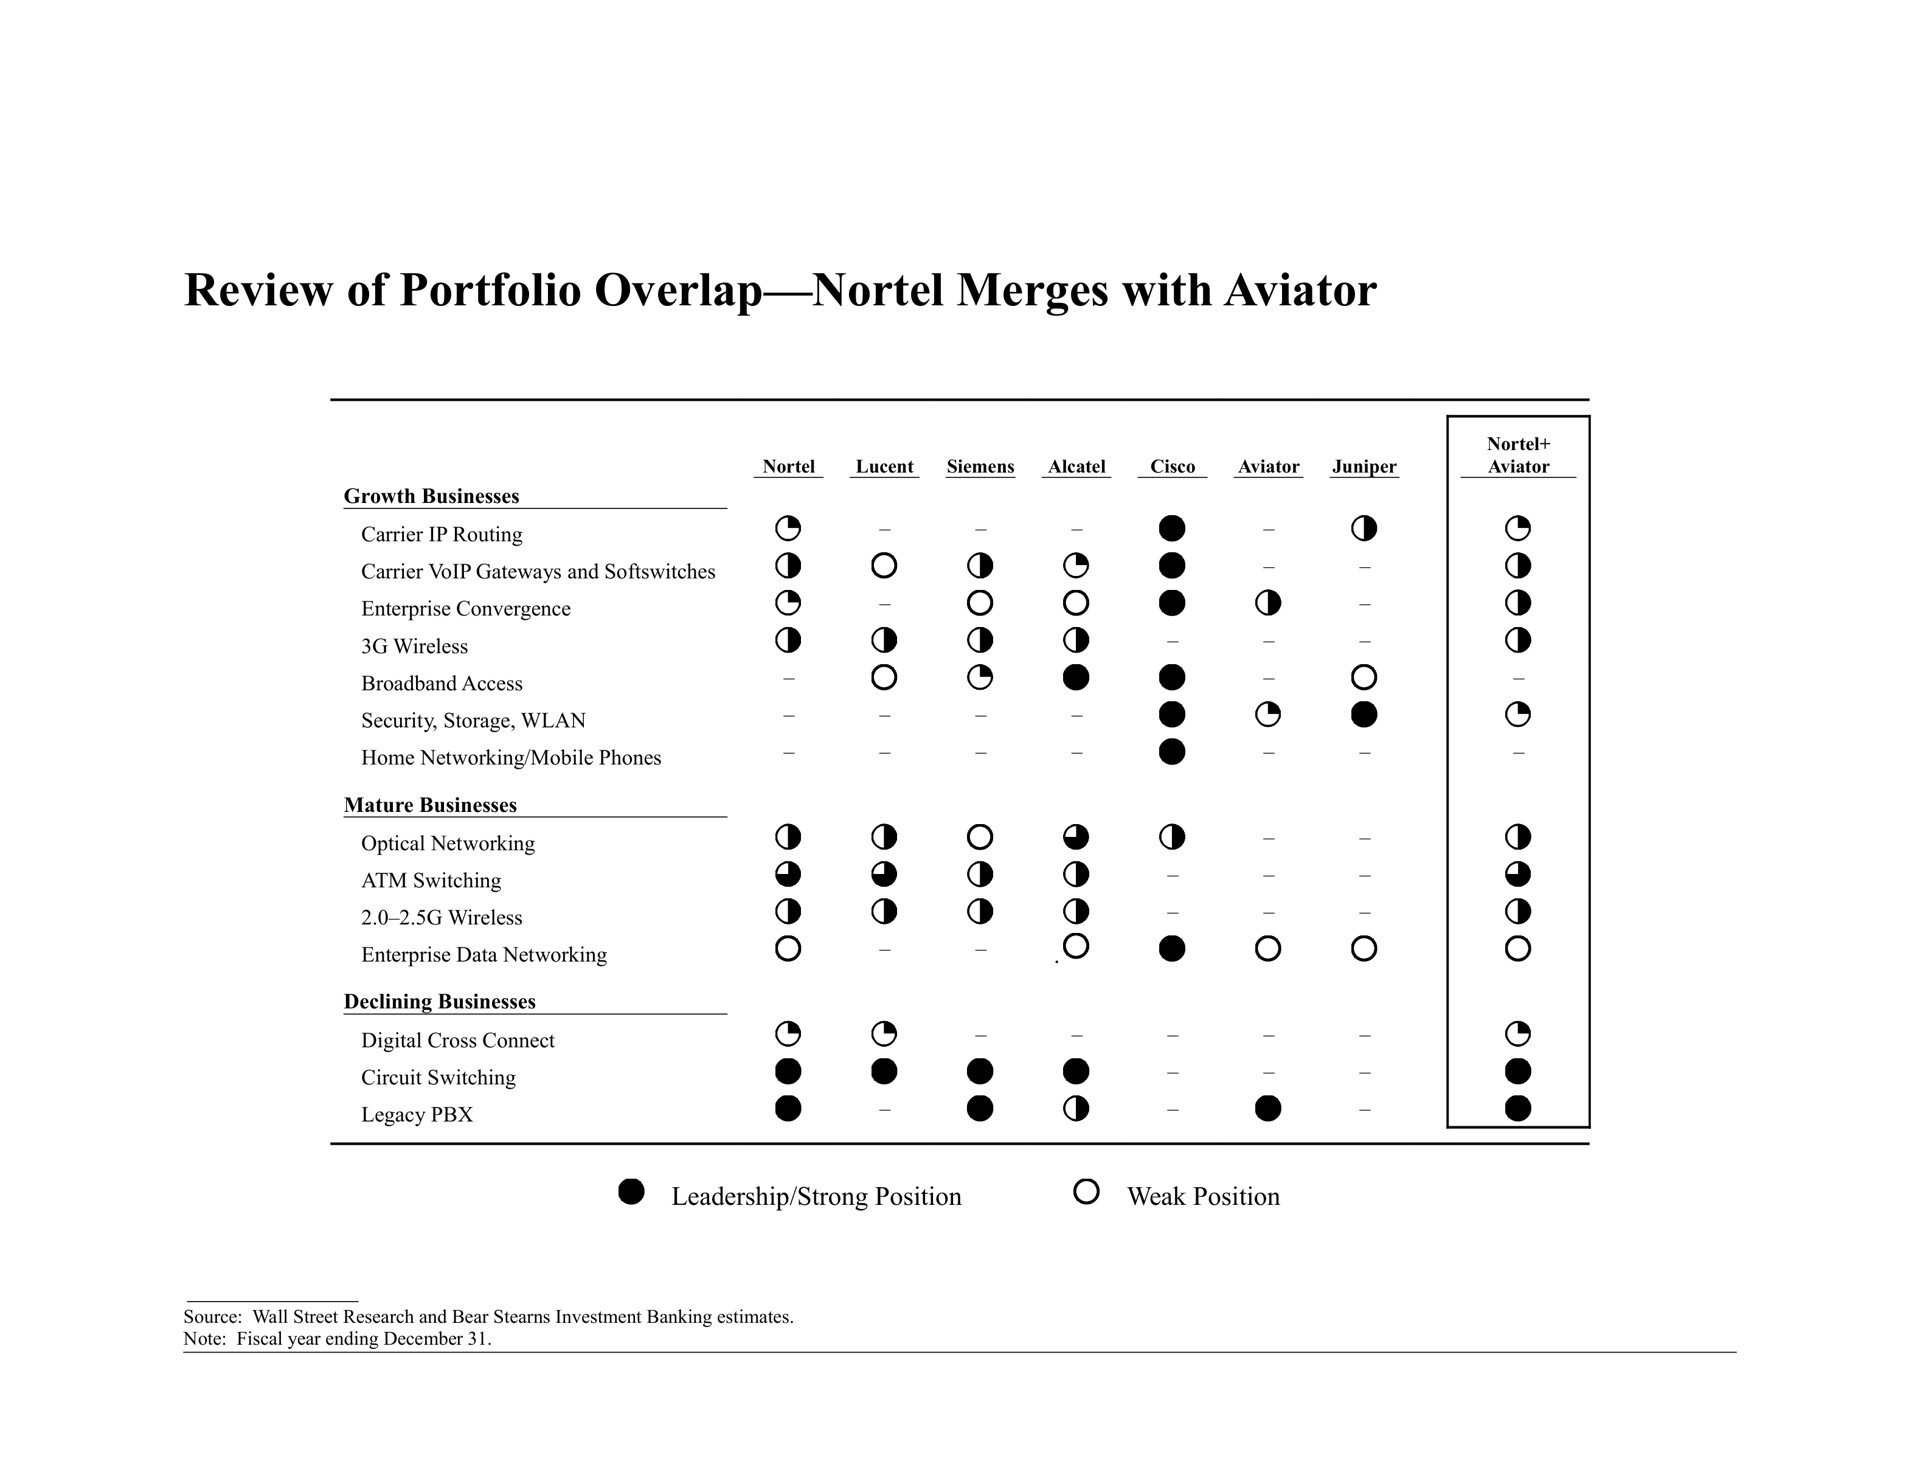 review of portfolio overlap merges with aviator | Bear Stearns